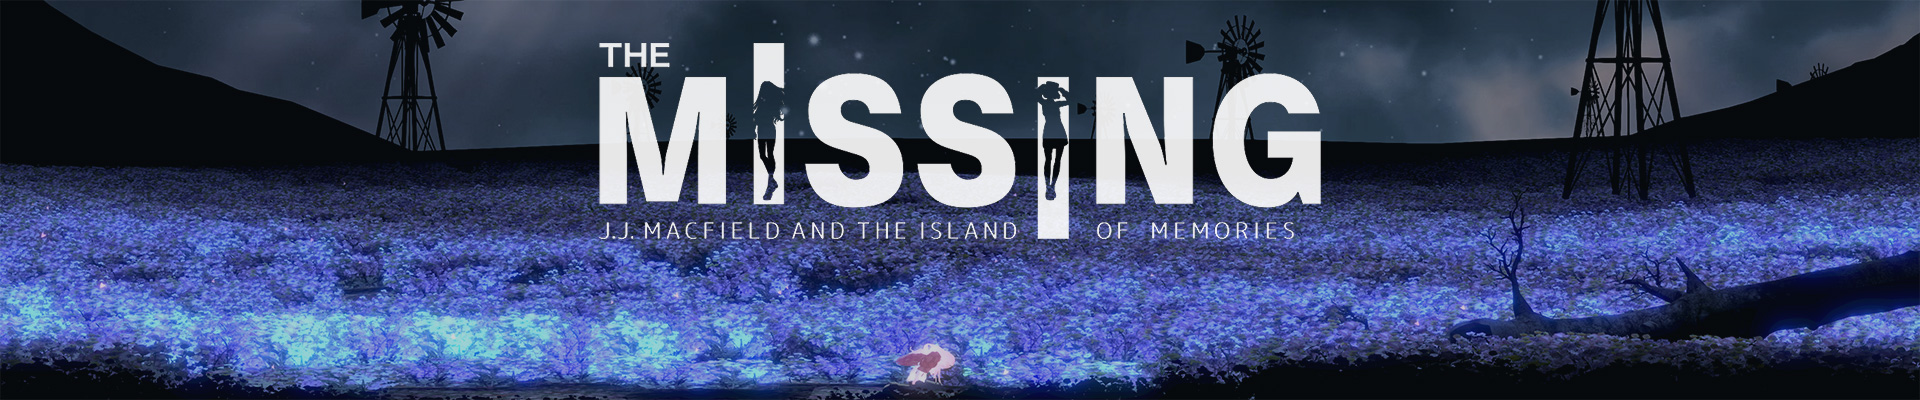 In love with: The MISSING: J.J. Macfield and the Island of Memories